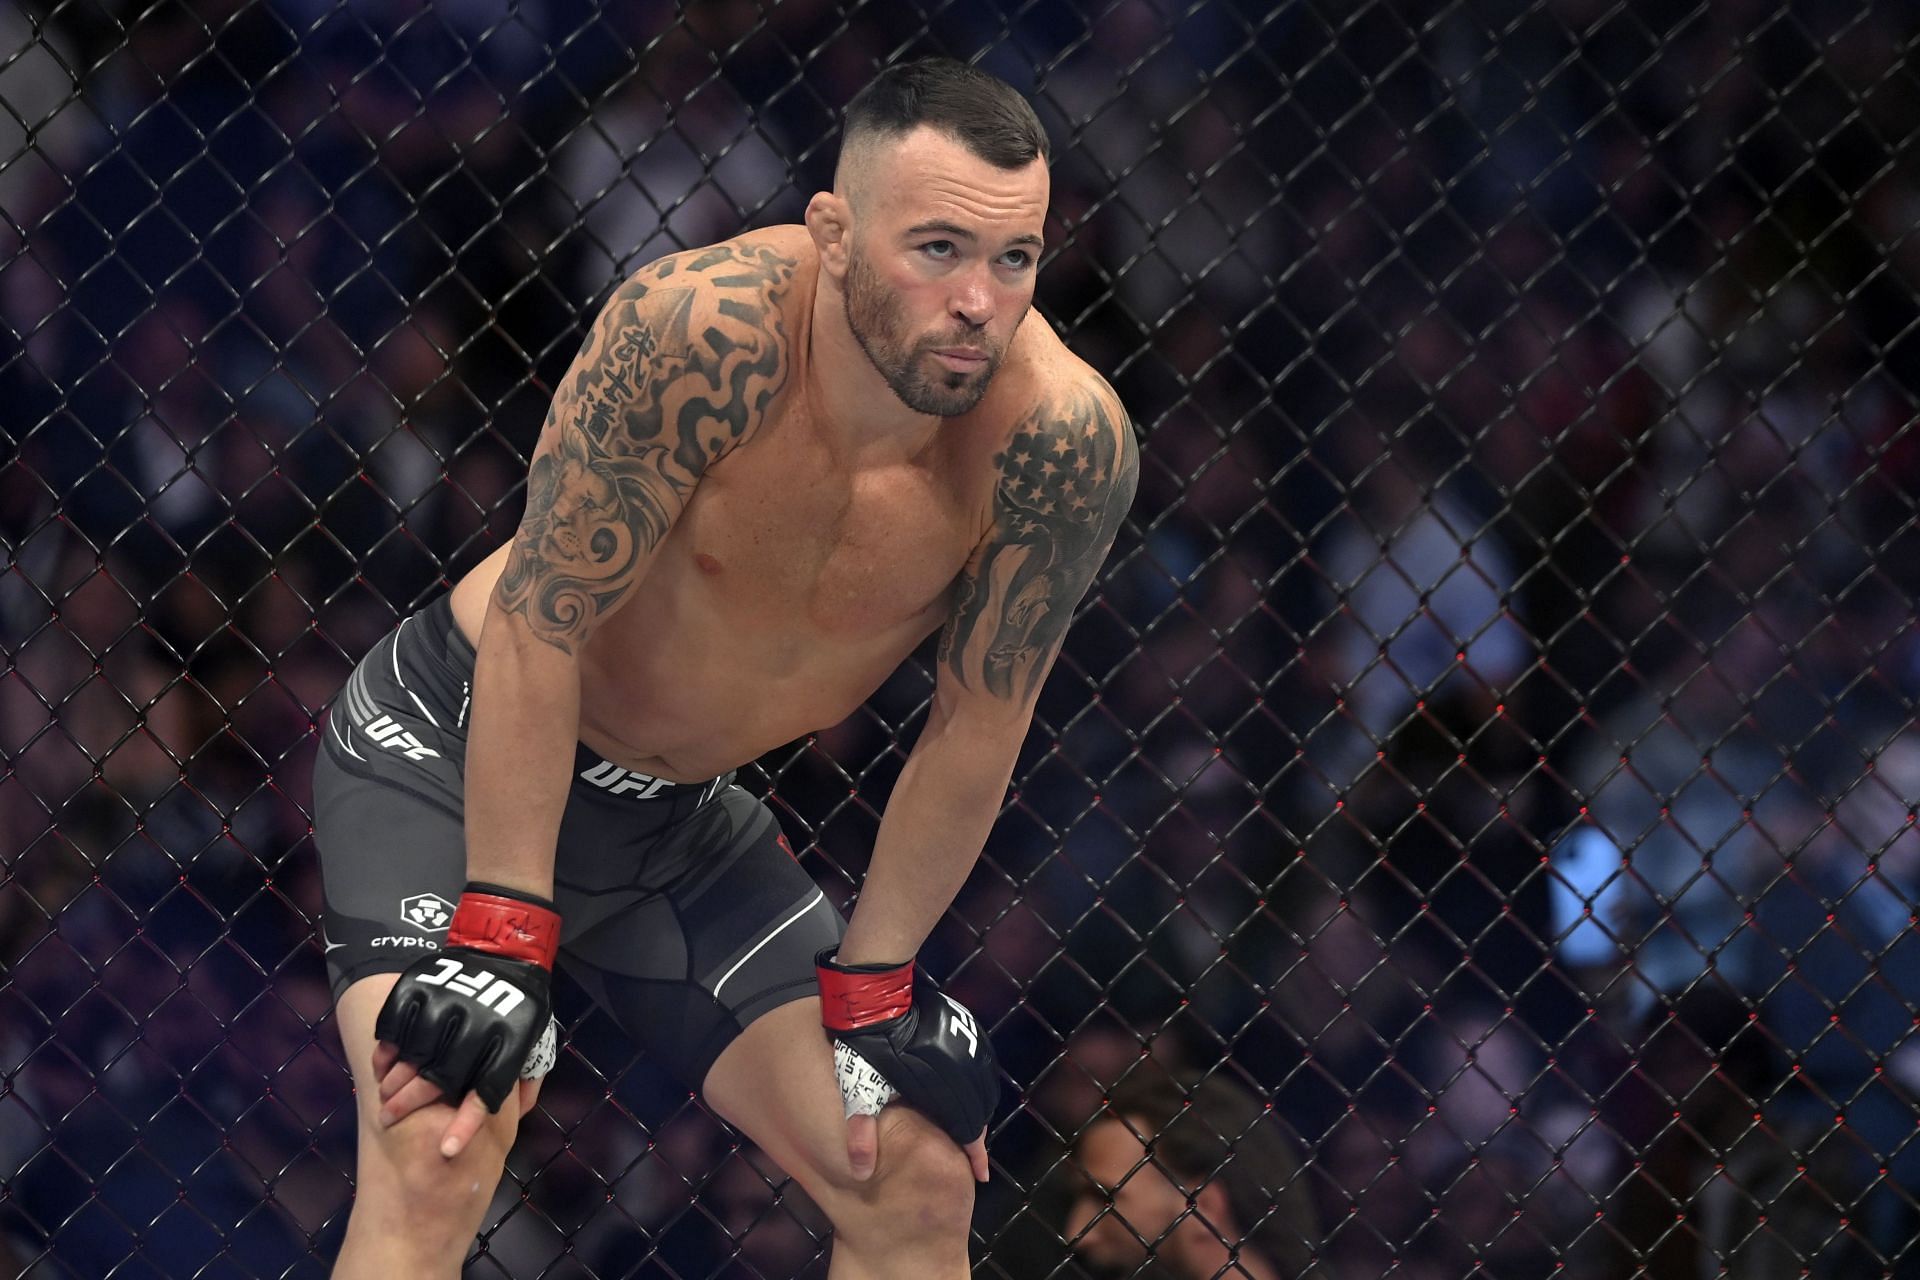 Could Colby Covington coach TUF against Conor McGregor without fighting him afterwards?